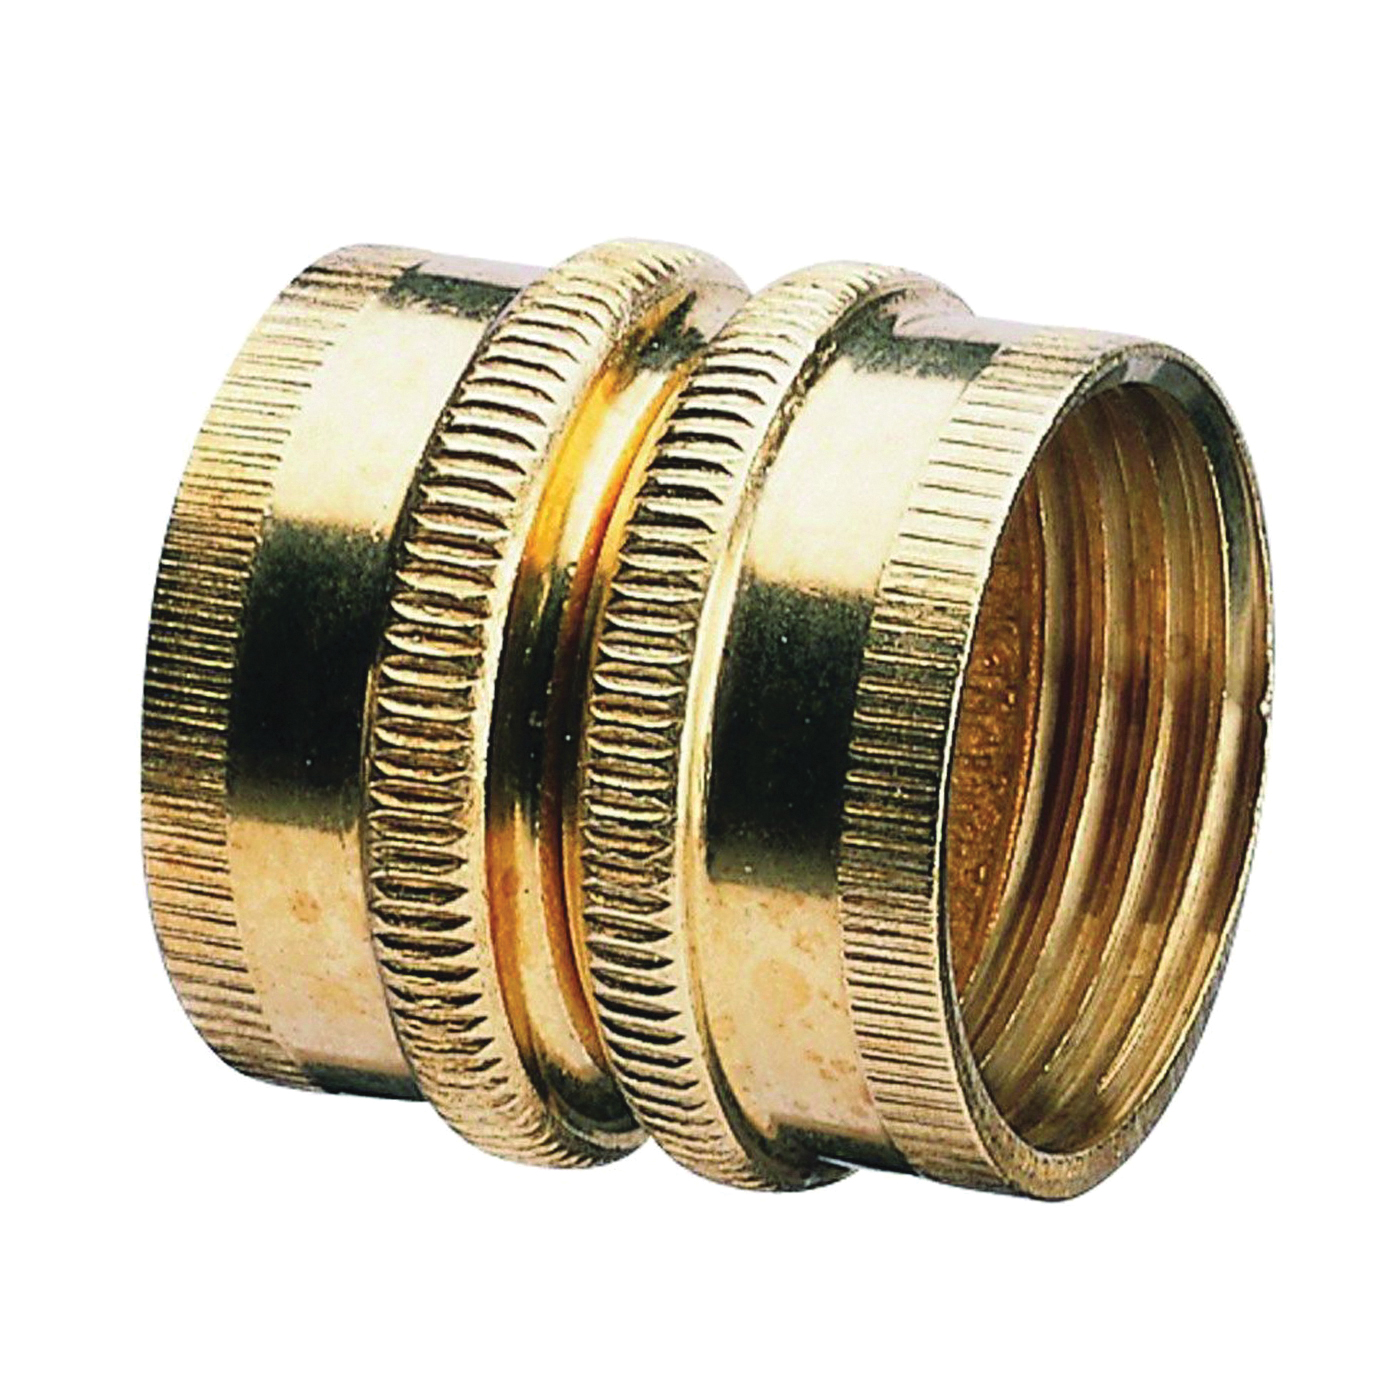 807734-1001 Hose Adapter, 3/4 x 3/4 in, FNH x FNH, Brass, For: Garden Hose